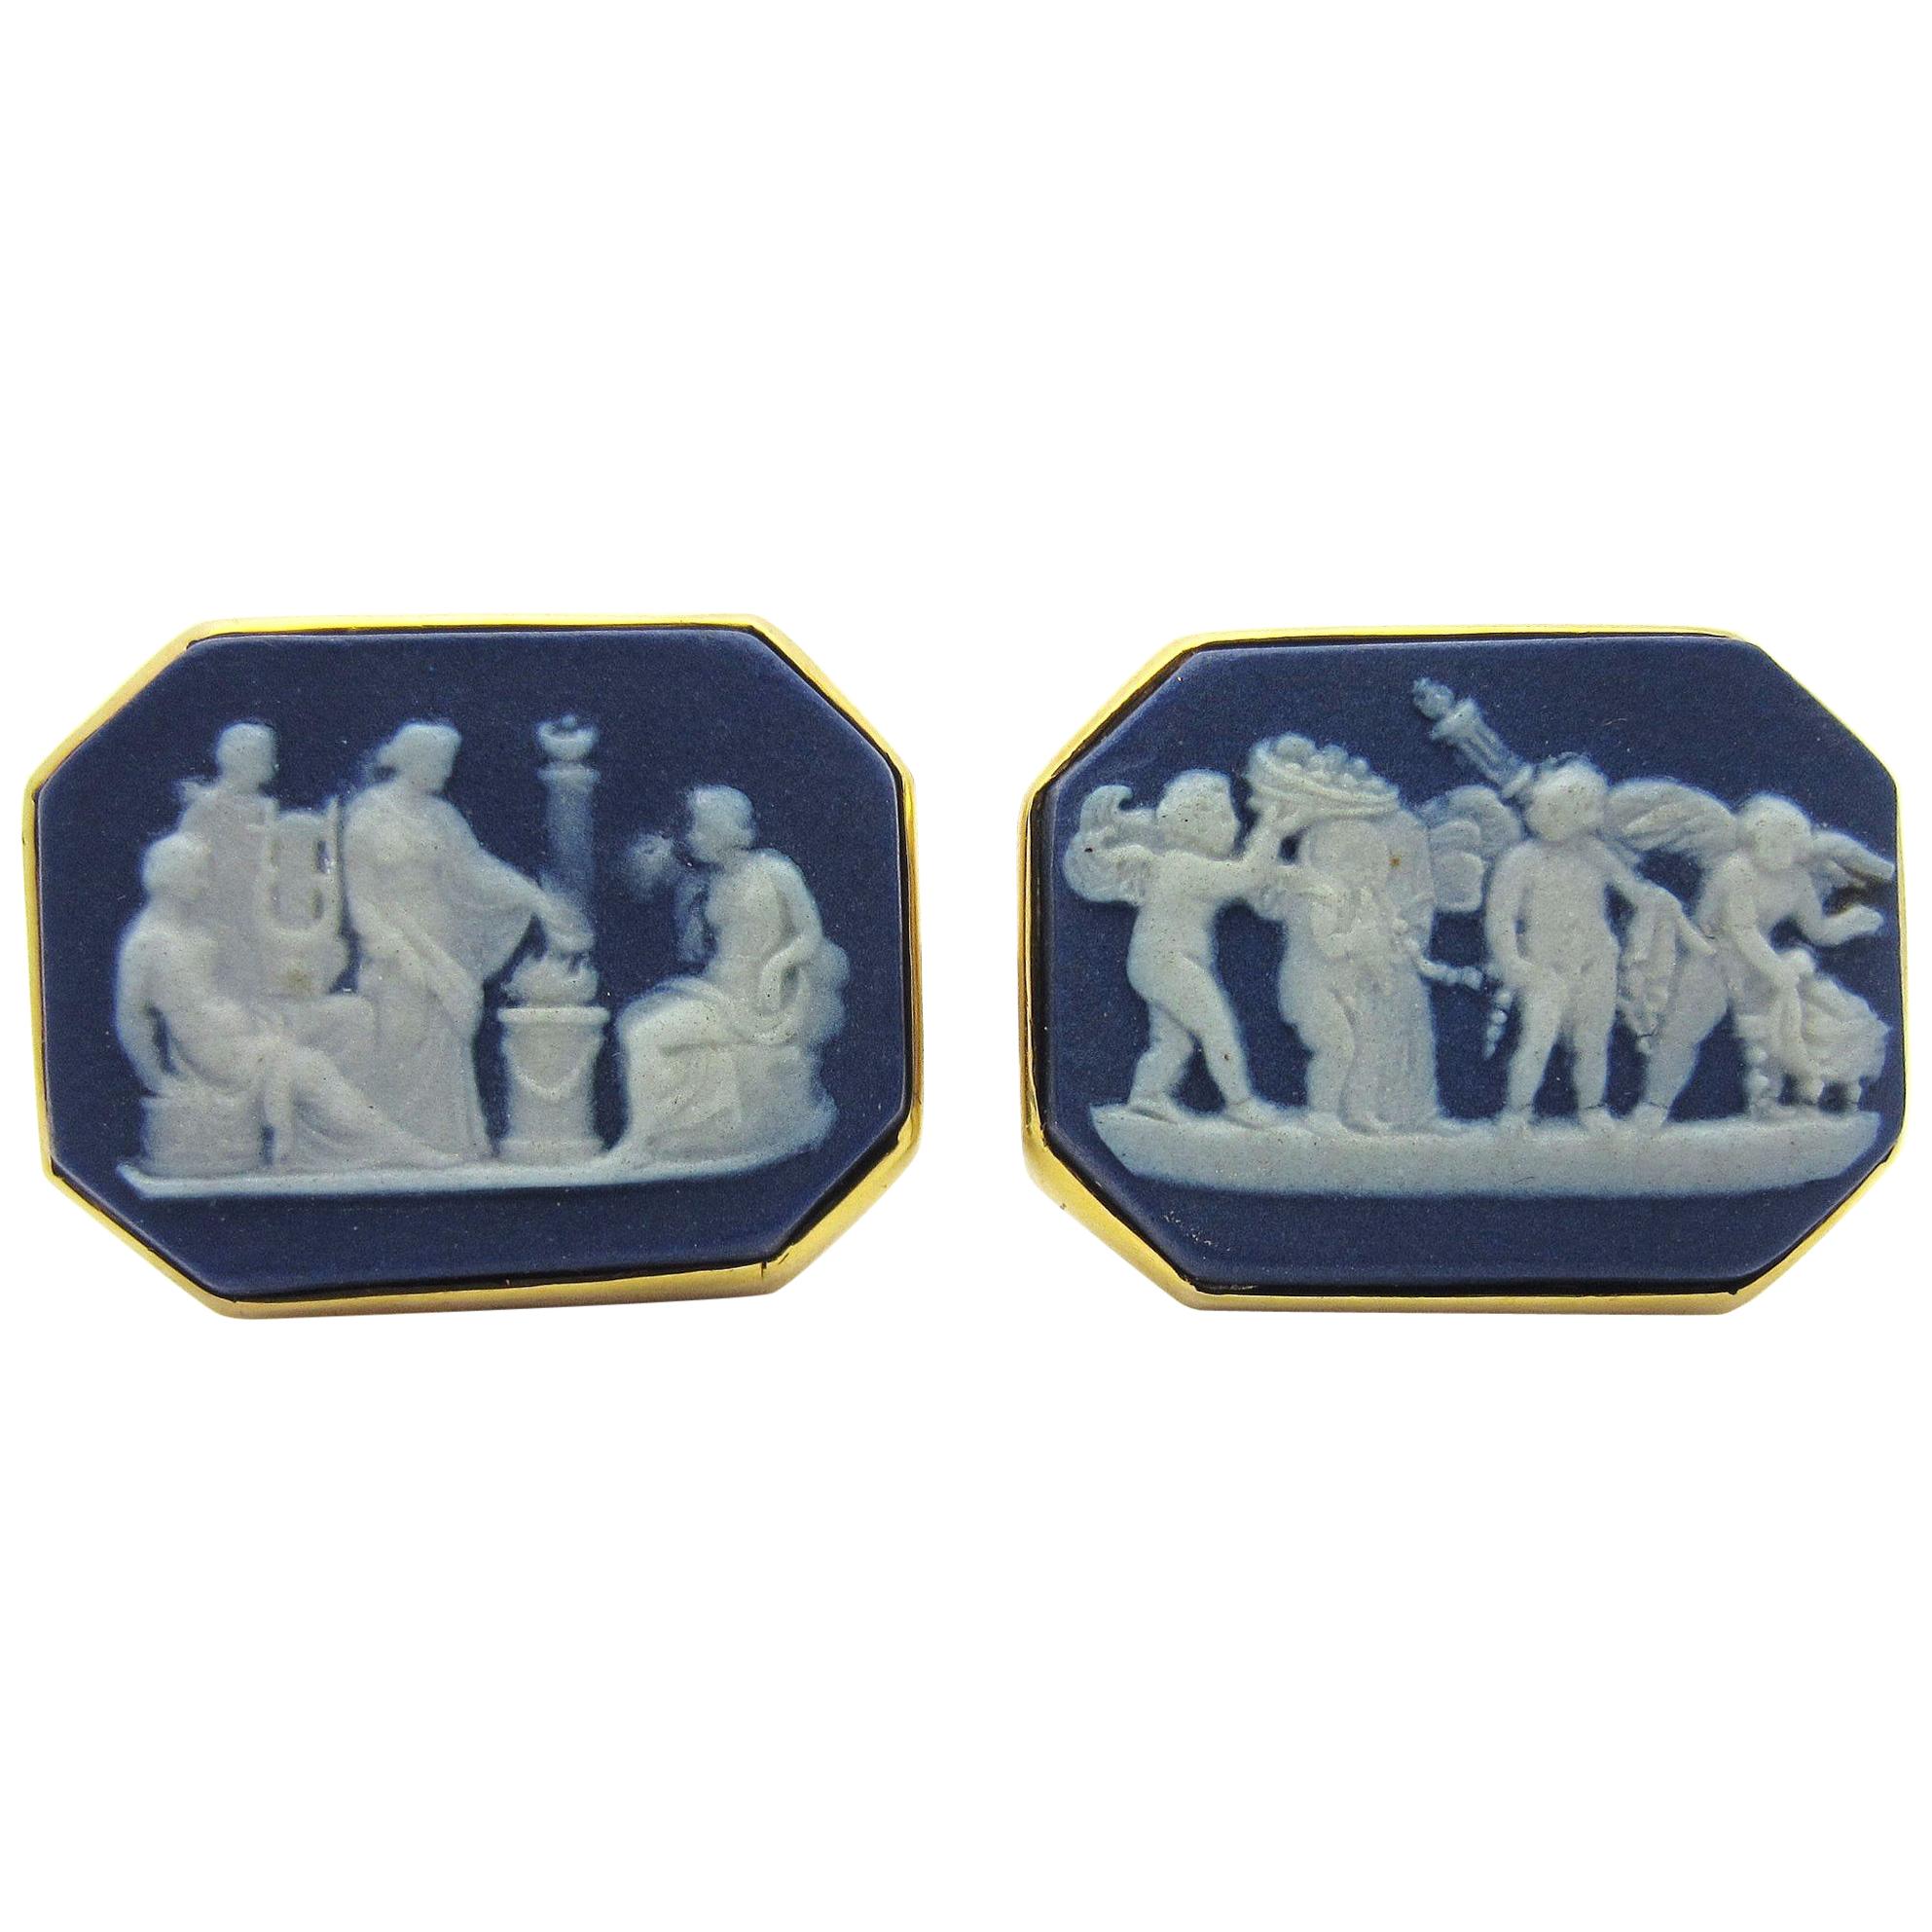 English jewelry maker, Wedgwood, has been creating exquisite cufflinks since 1759. This wonderful pair of 14k yellow gold links are no exception.
The matching pair is finished with two bezel-set Wedgwood-original carvings in deep blue with ancient